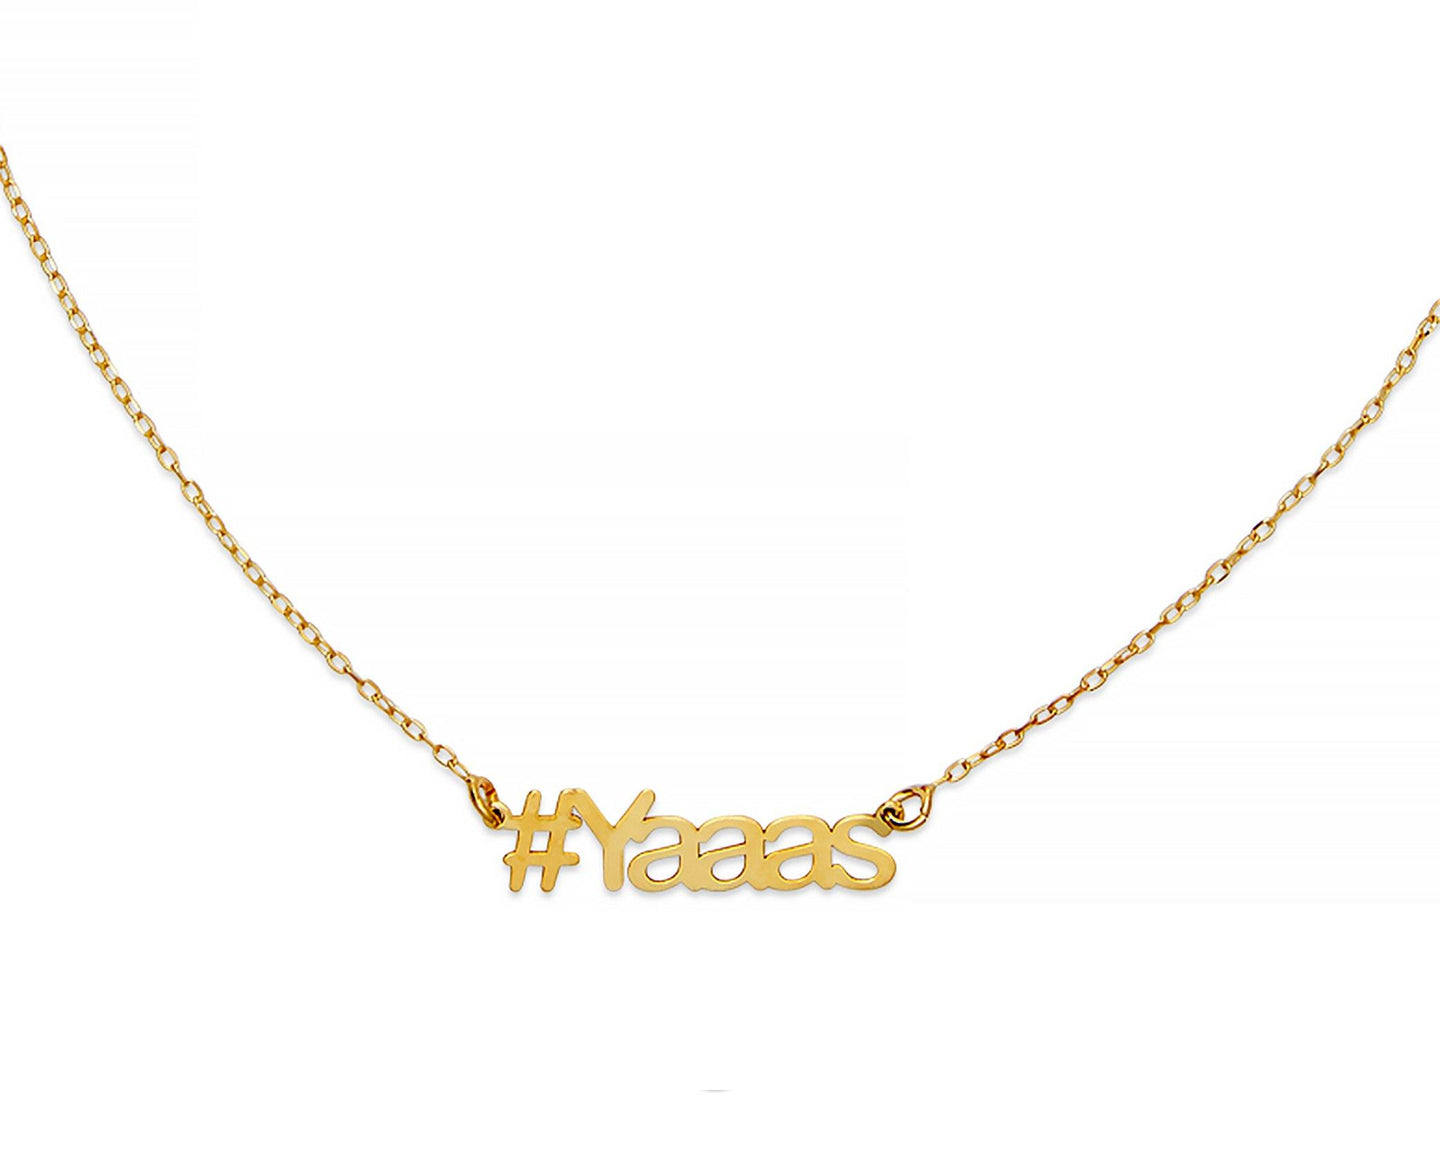 Yaaas Hashtag Necklace - InclusiveJewelry